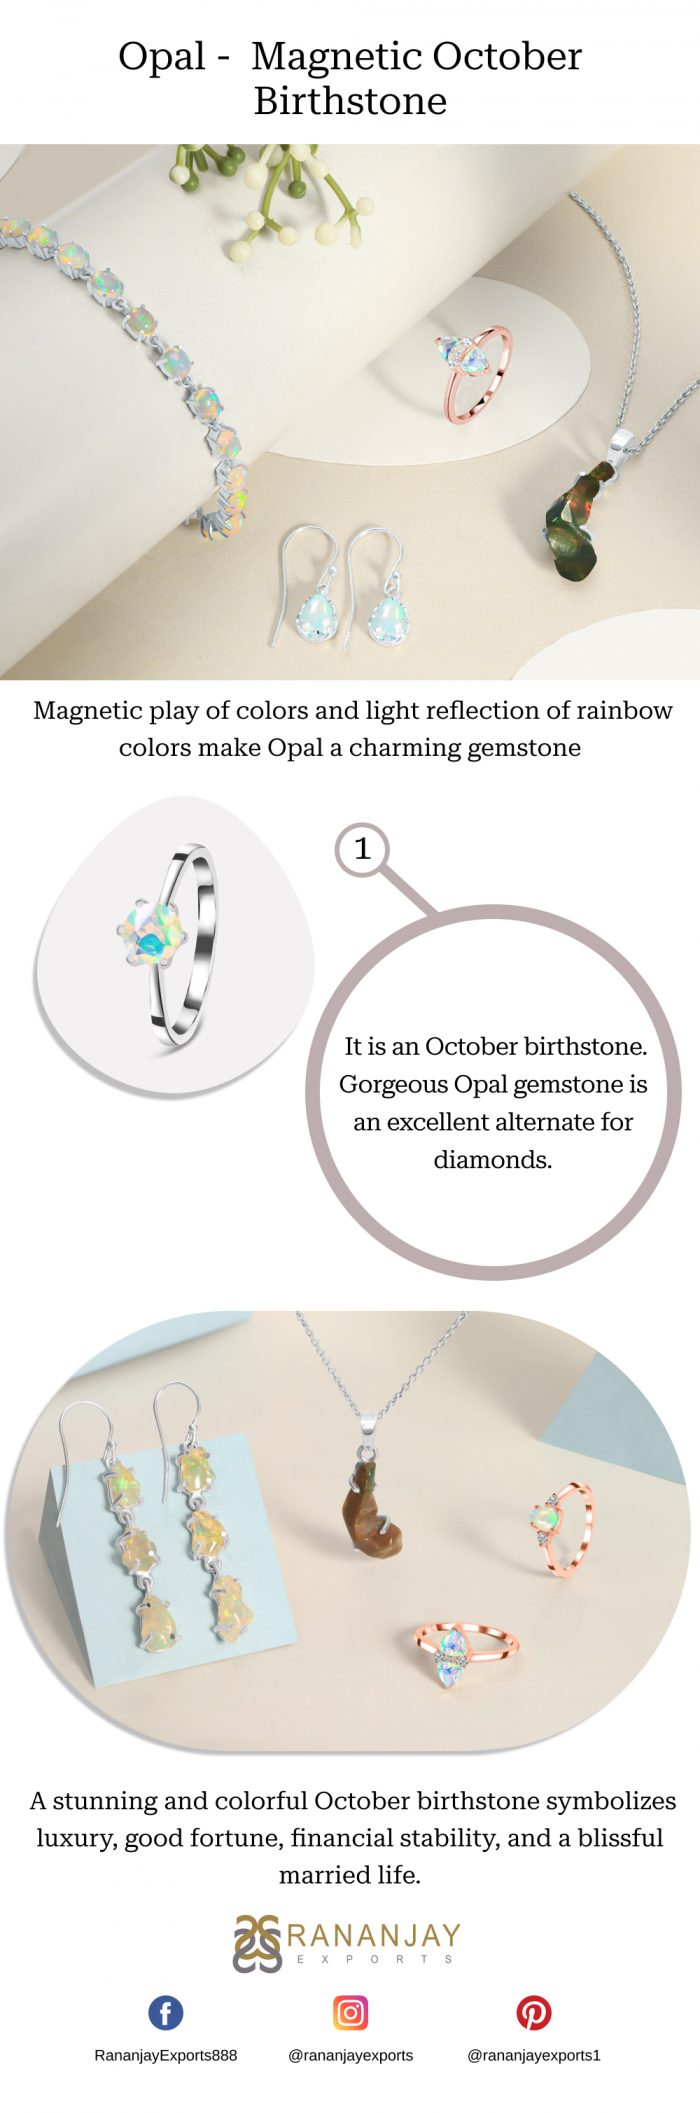 Opal – Magnetic October Birthstone